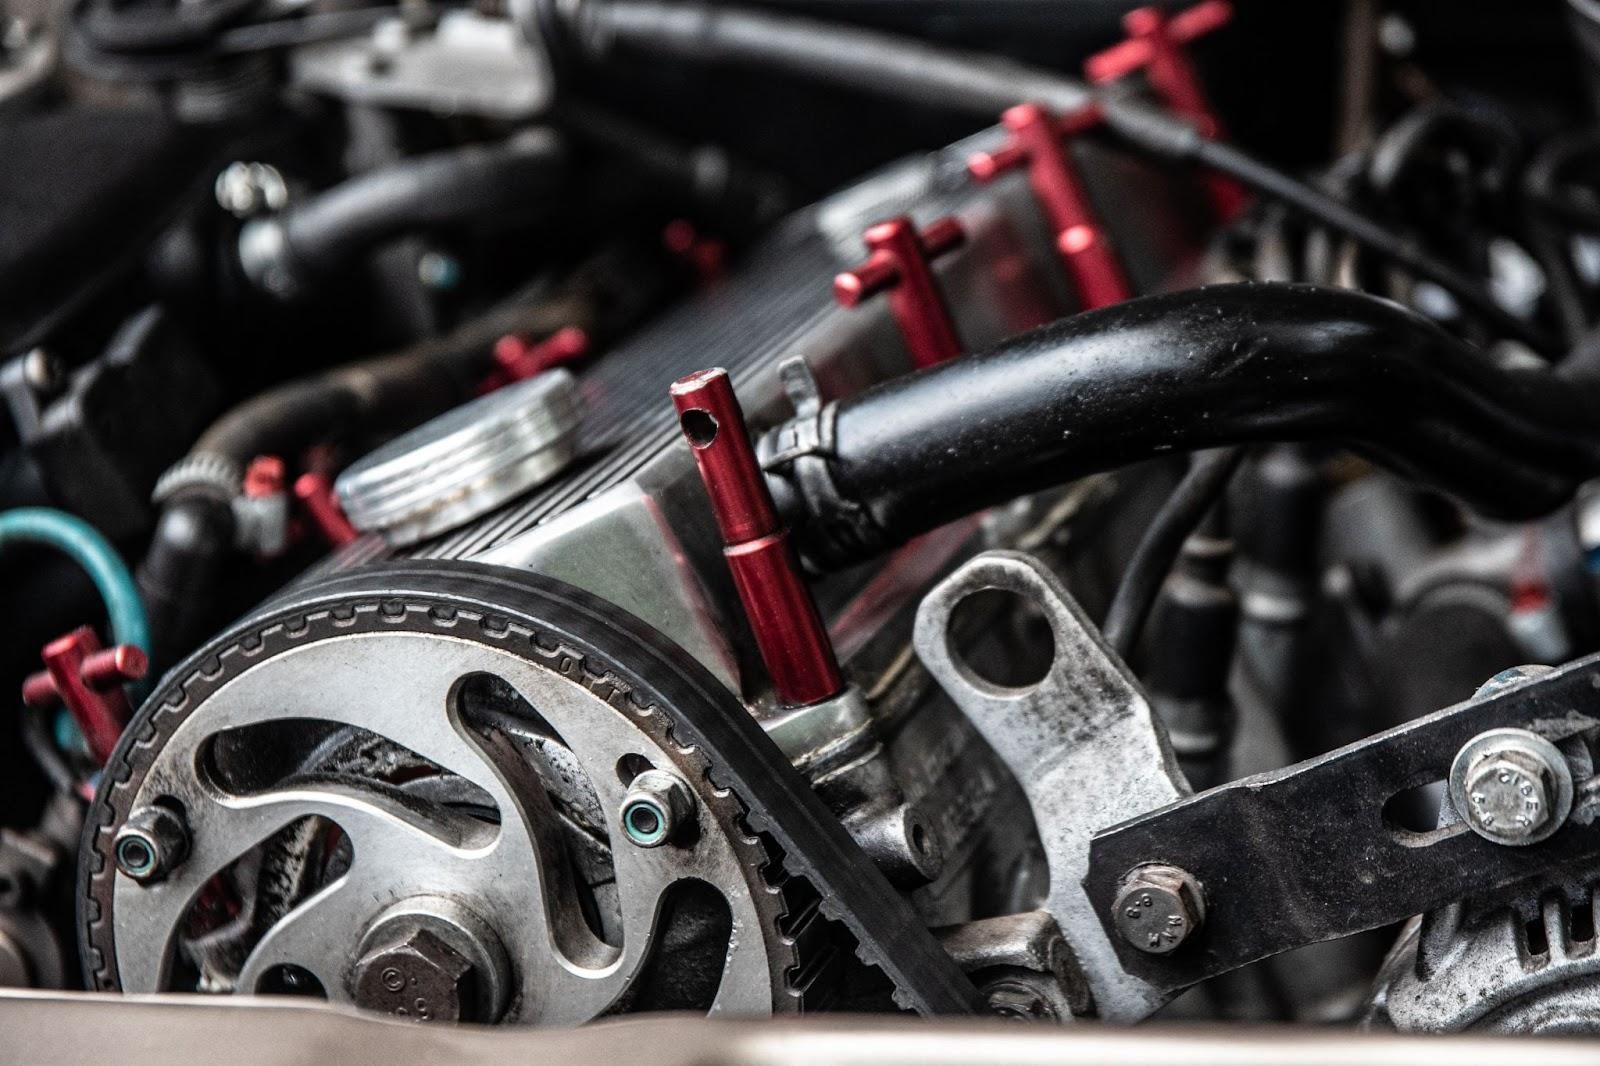 Timing Belt Service at ﻿Jerry's Auto Repair﻿ in ﻿Pullman, WA﻿